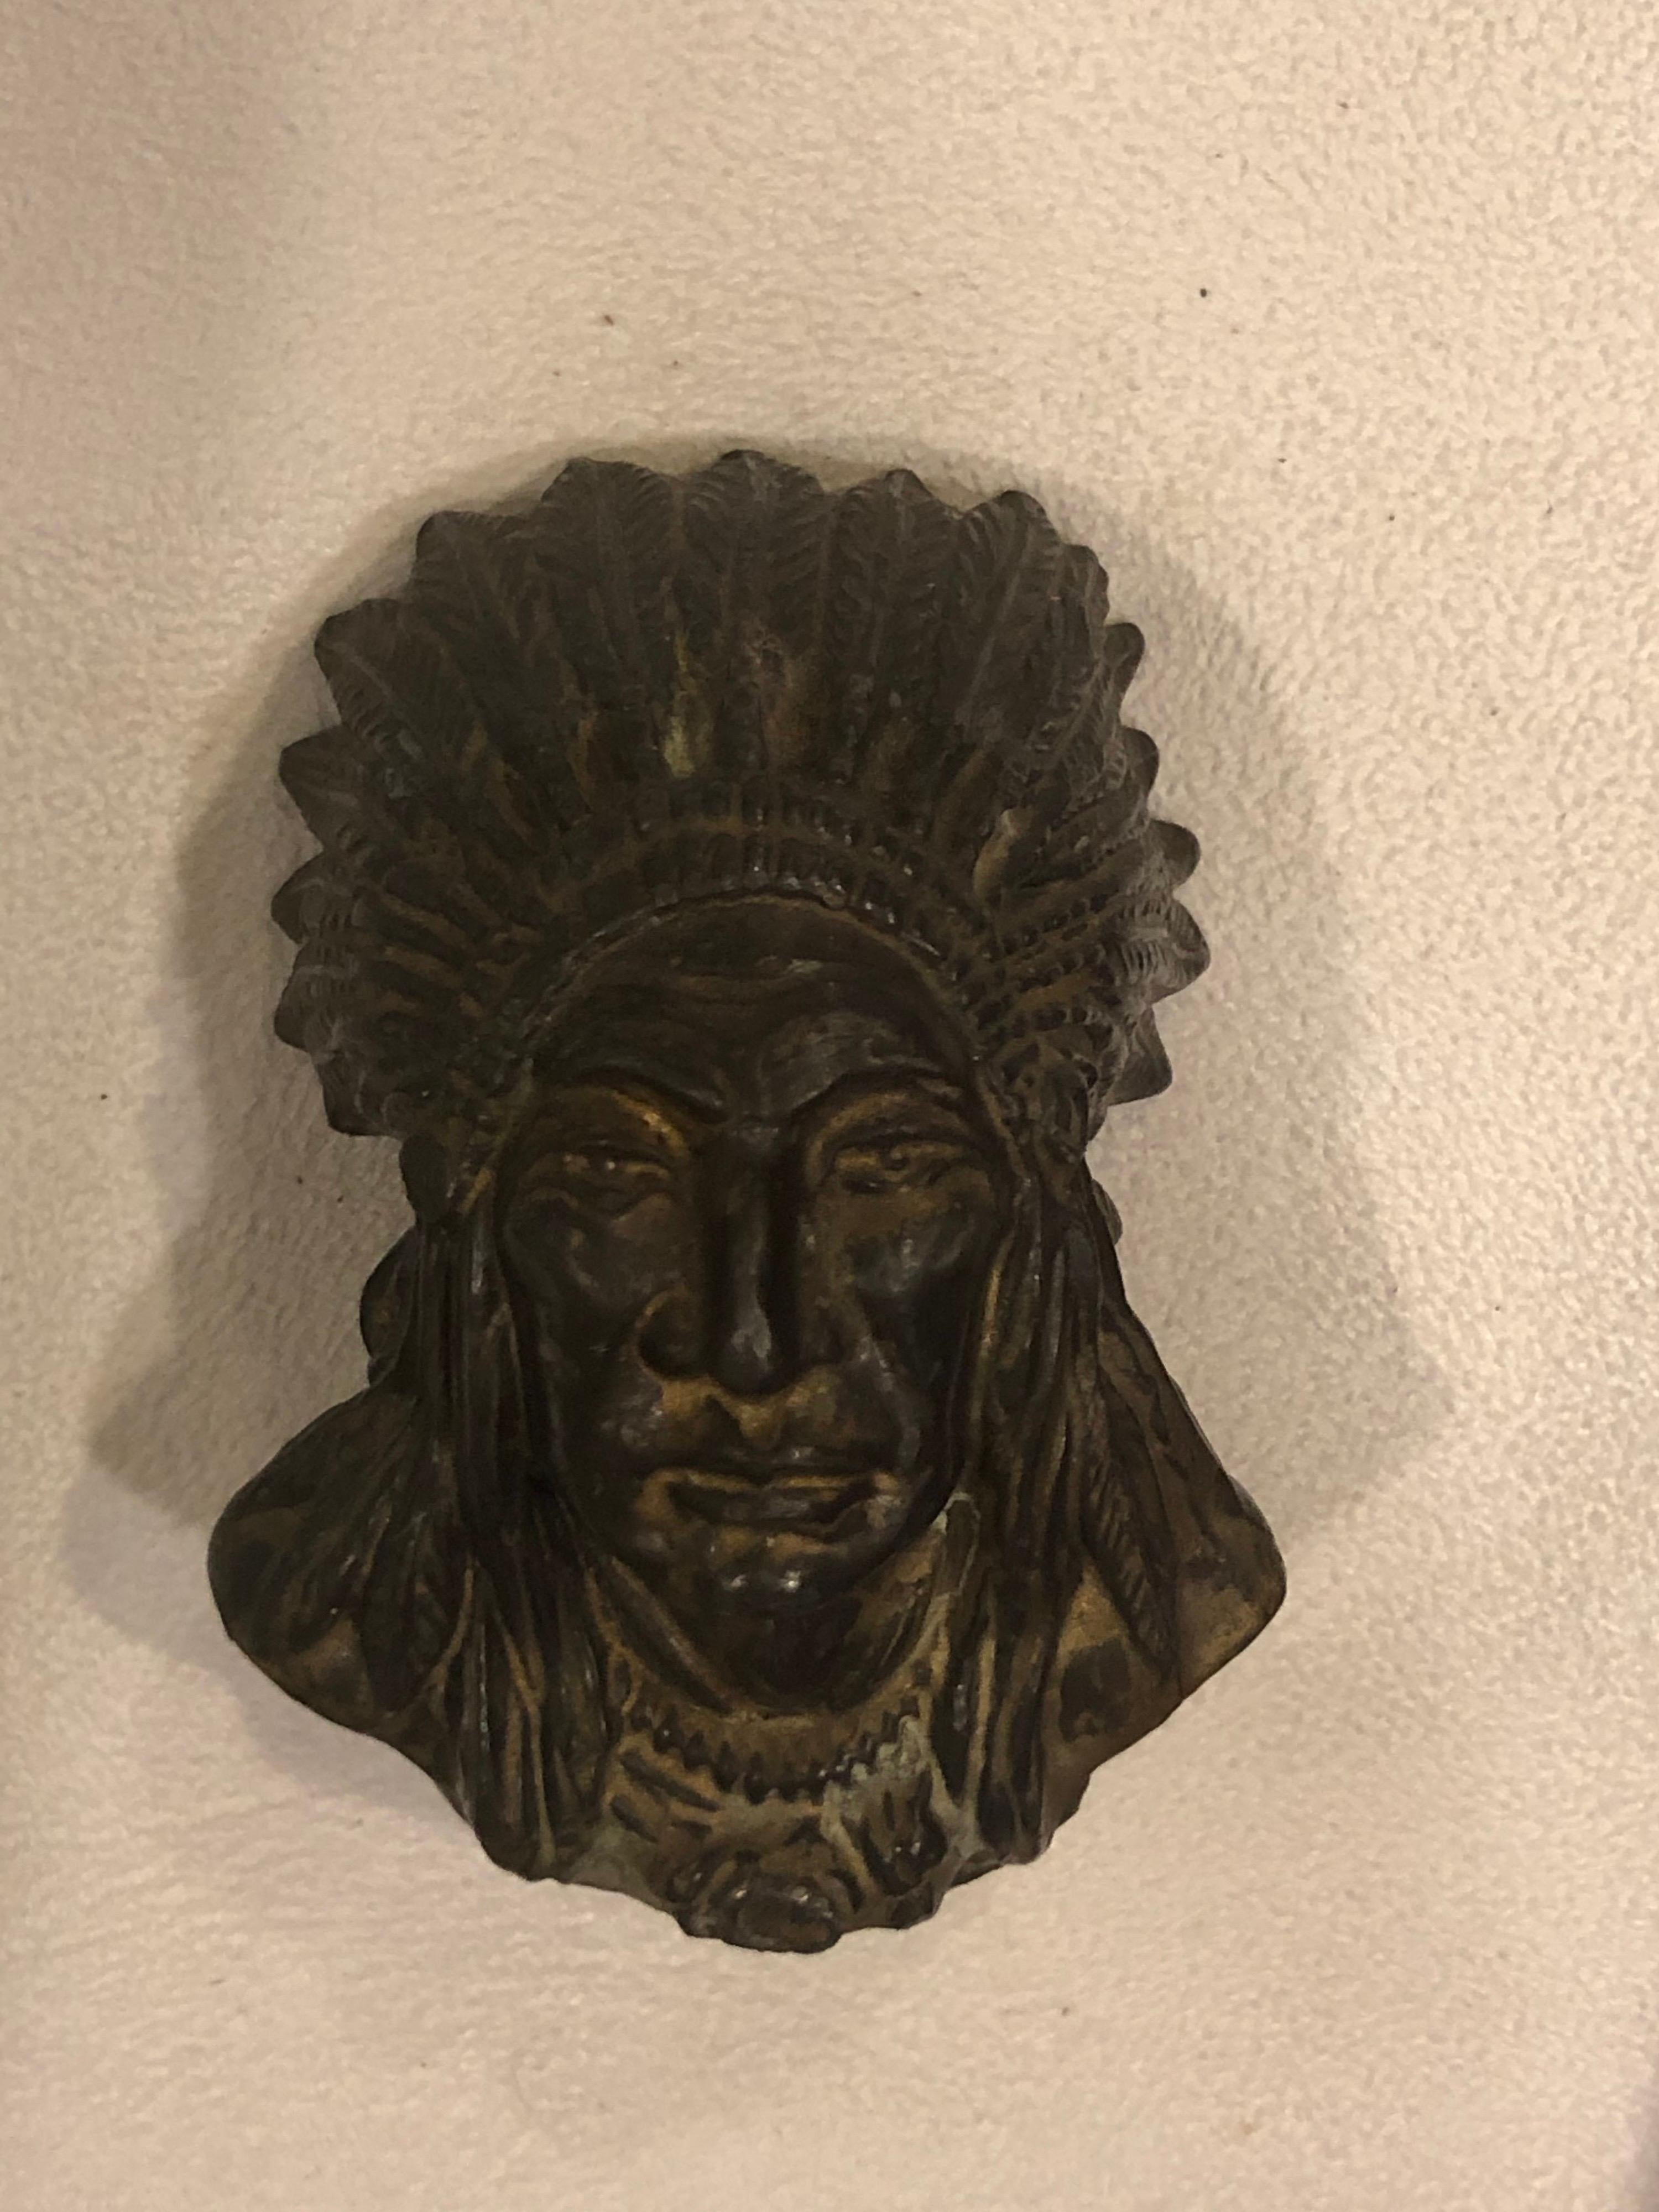 Small Indian sculpture in Metal. proud Native American Indian Chief in full Headdress. Possibly was mounted on something else originally. Ships via parcel for $29.